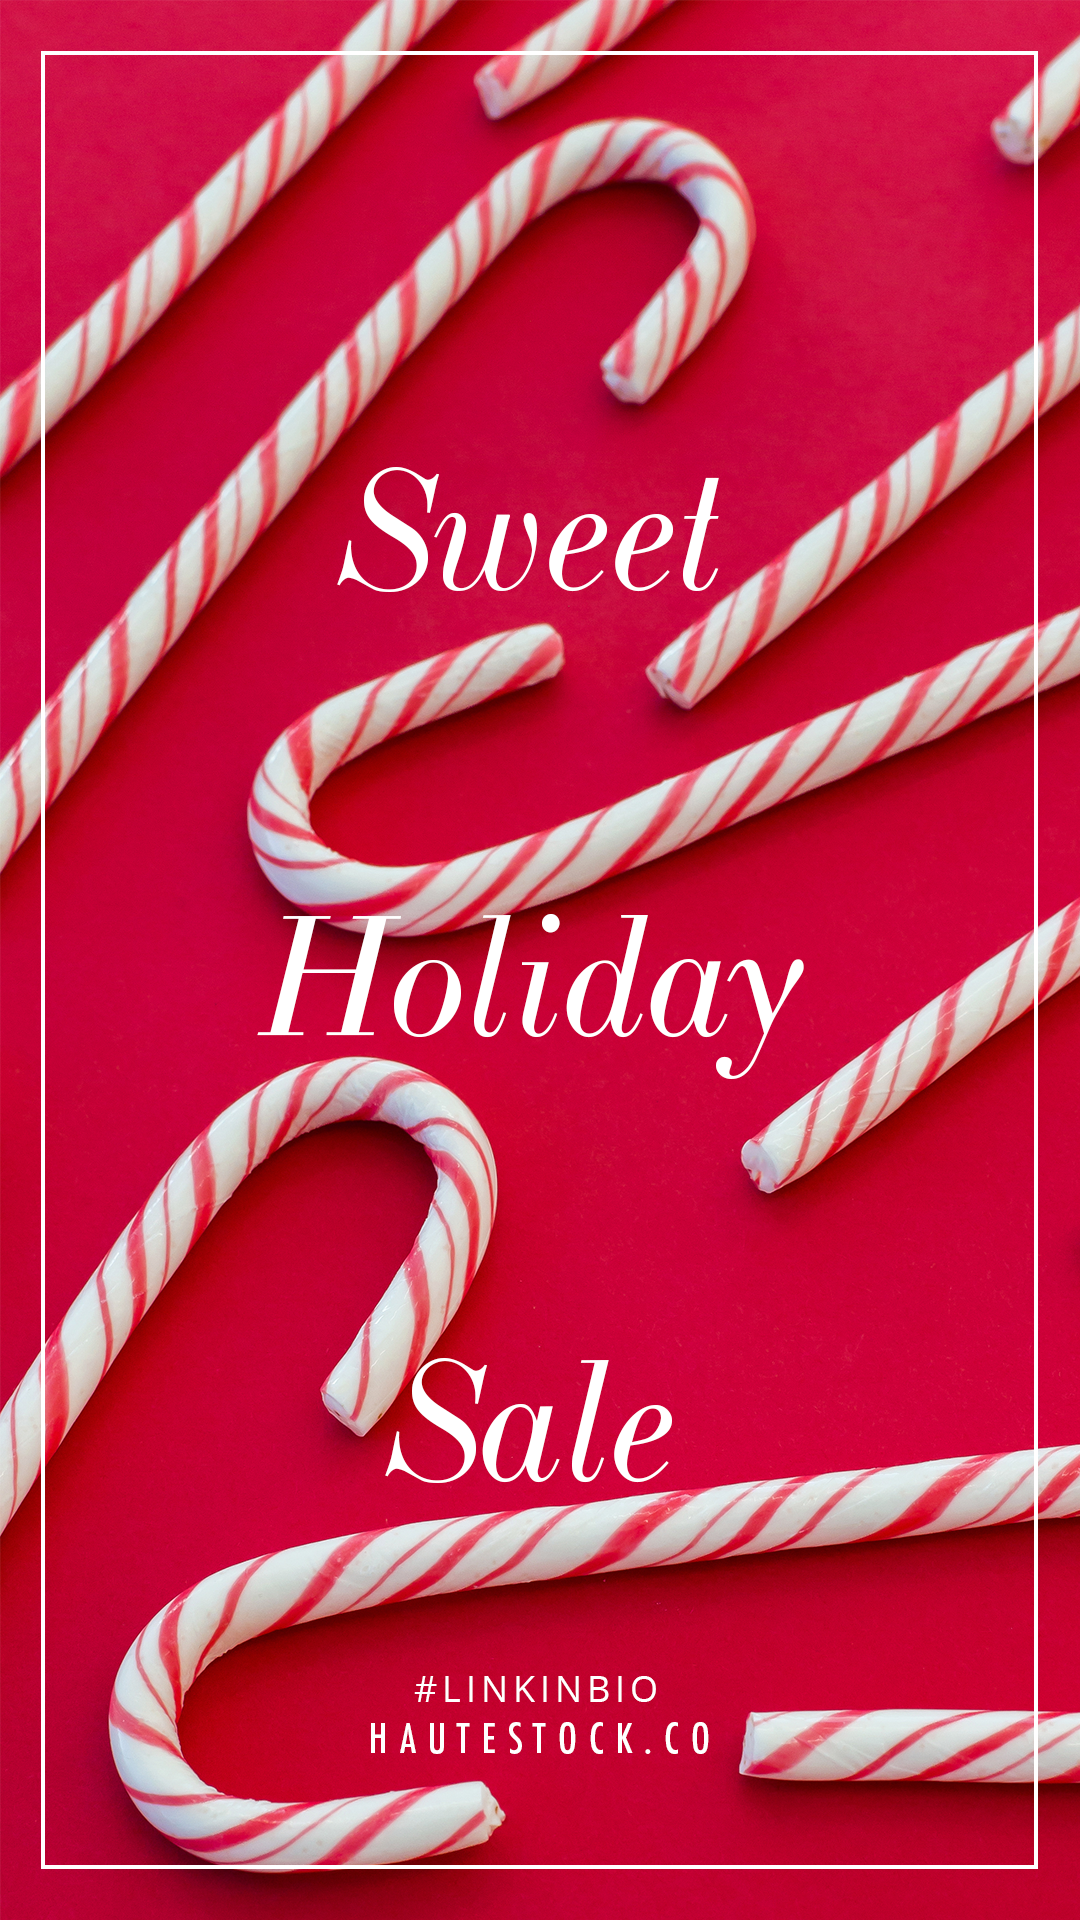 Create scroll-stopping graphics for your business' holiday sale with Haute Stock's holiday images.